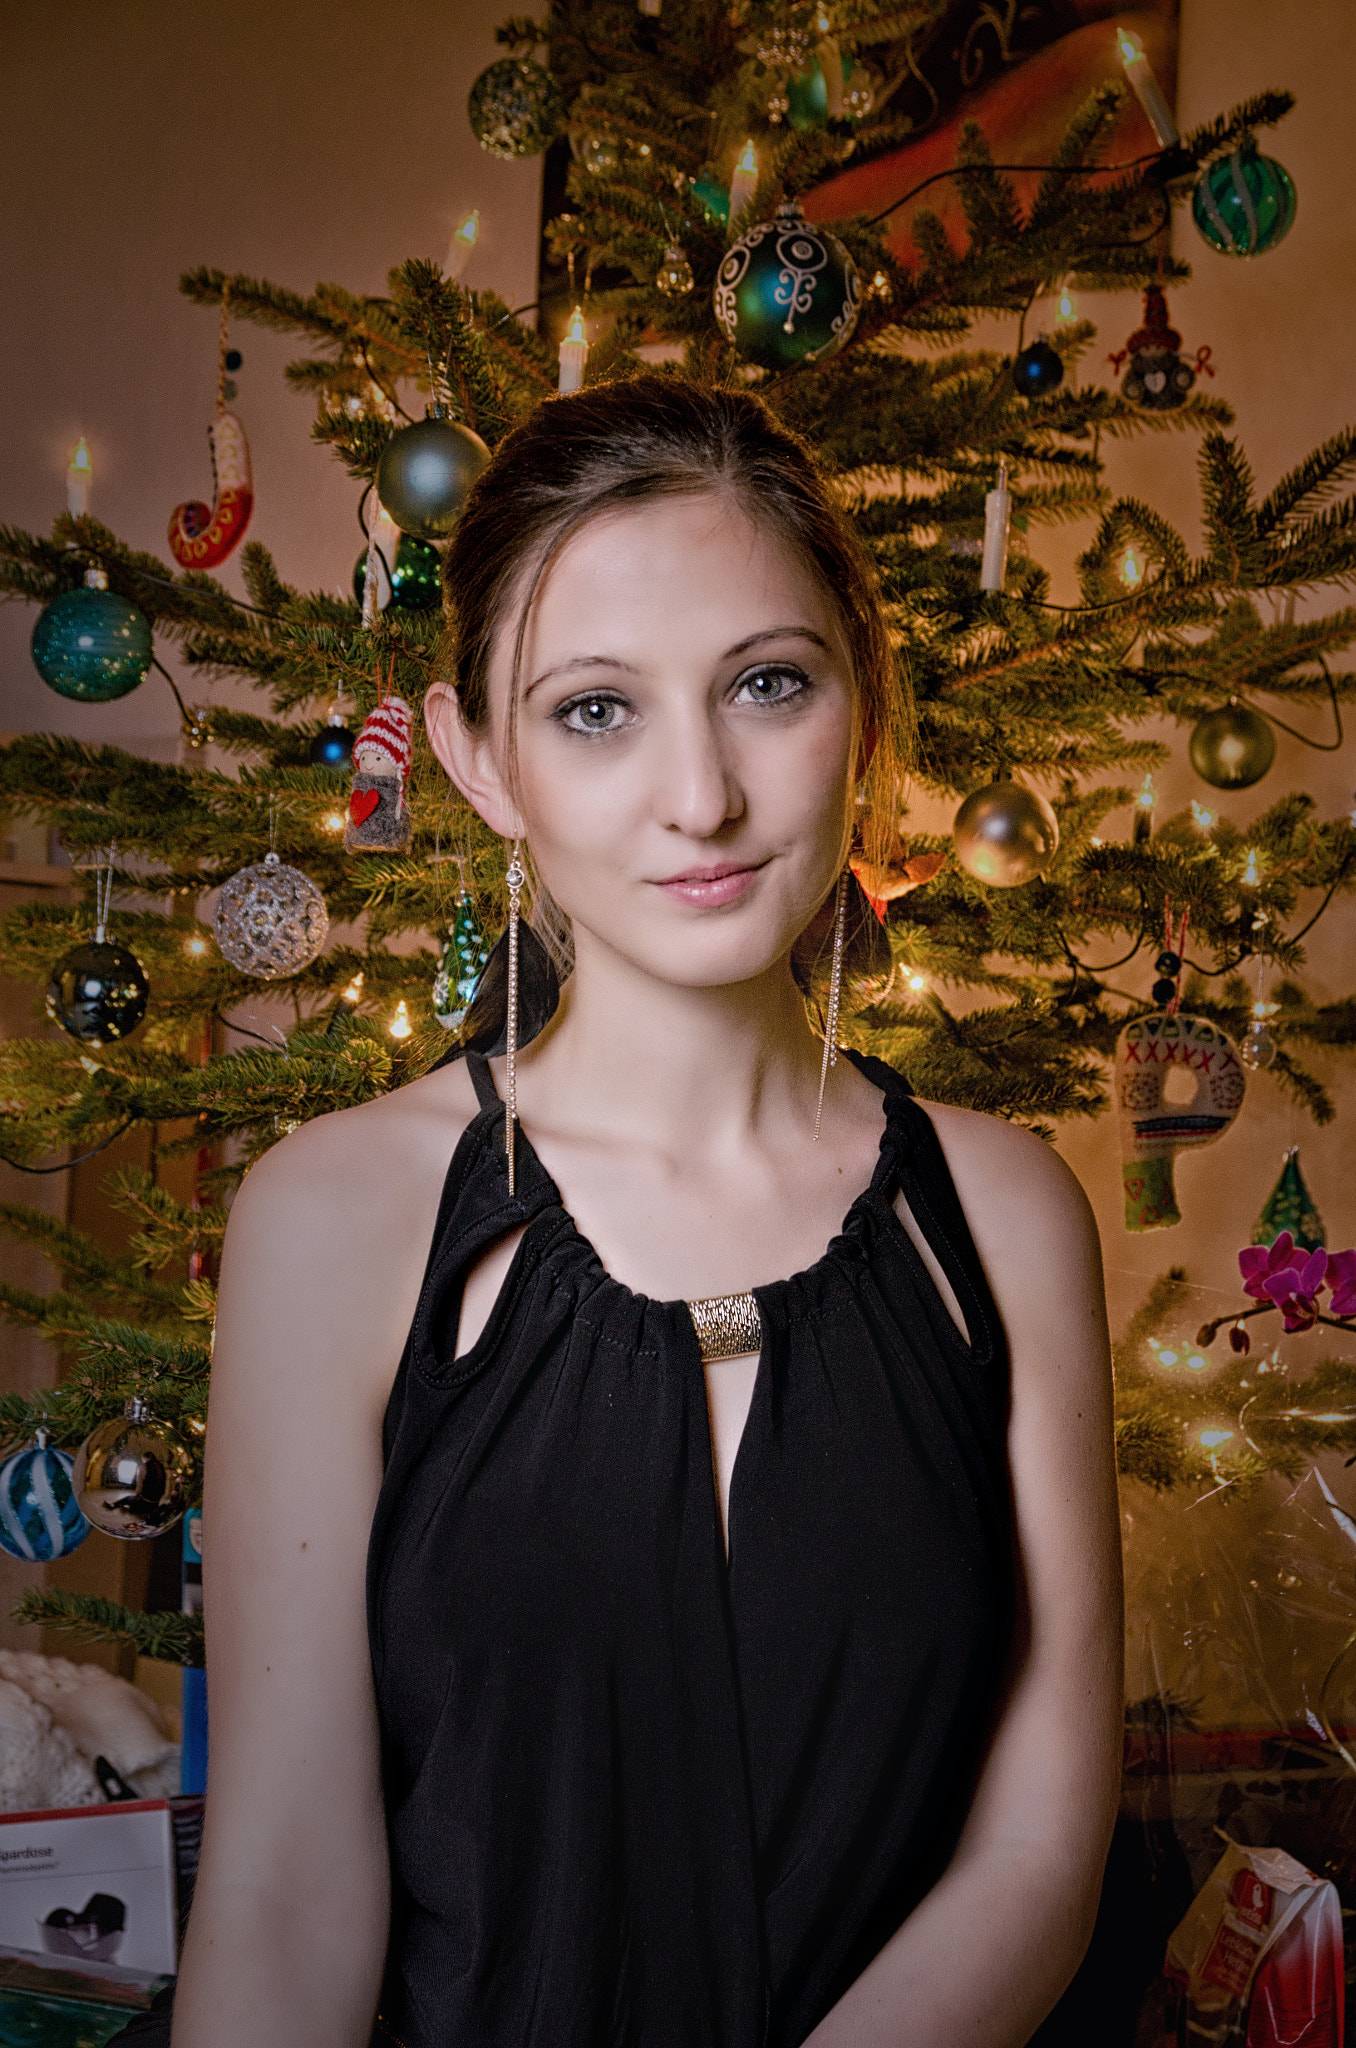 Nikon D7000 + Sigma 17-70mm F2.8-4 DC Macro OS HSM | C sample photo. An angel in front of the christmas tree photography